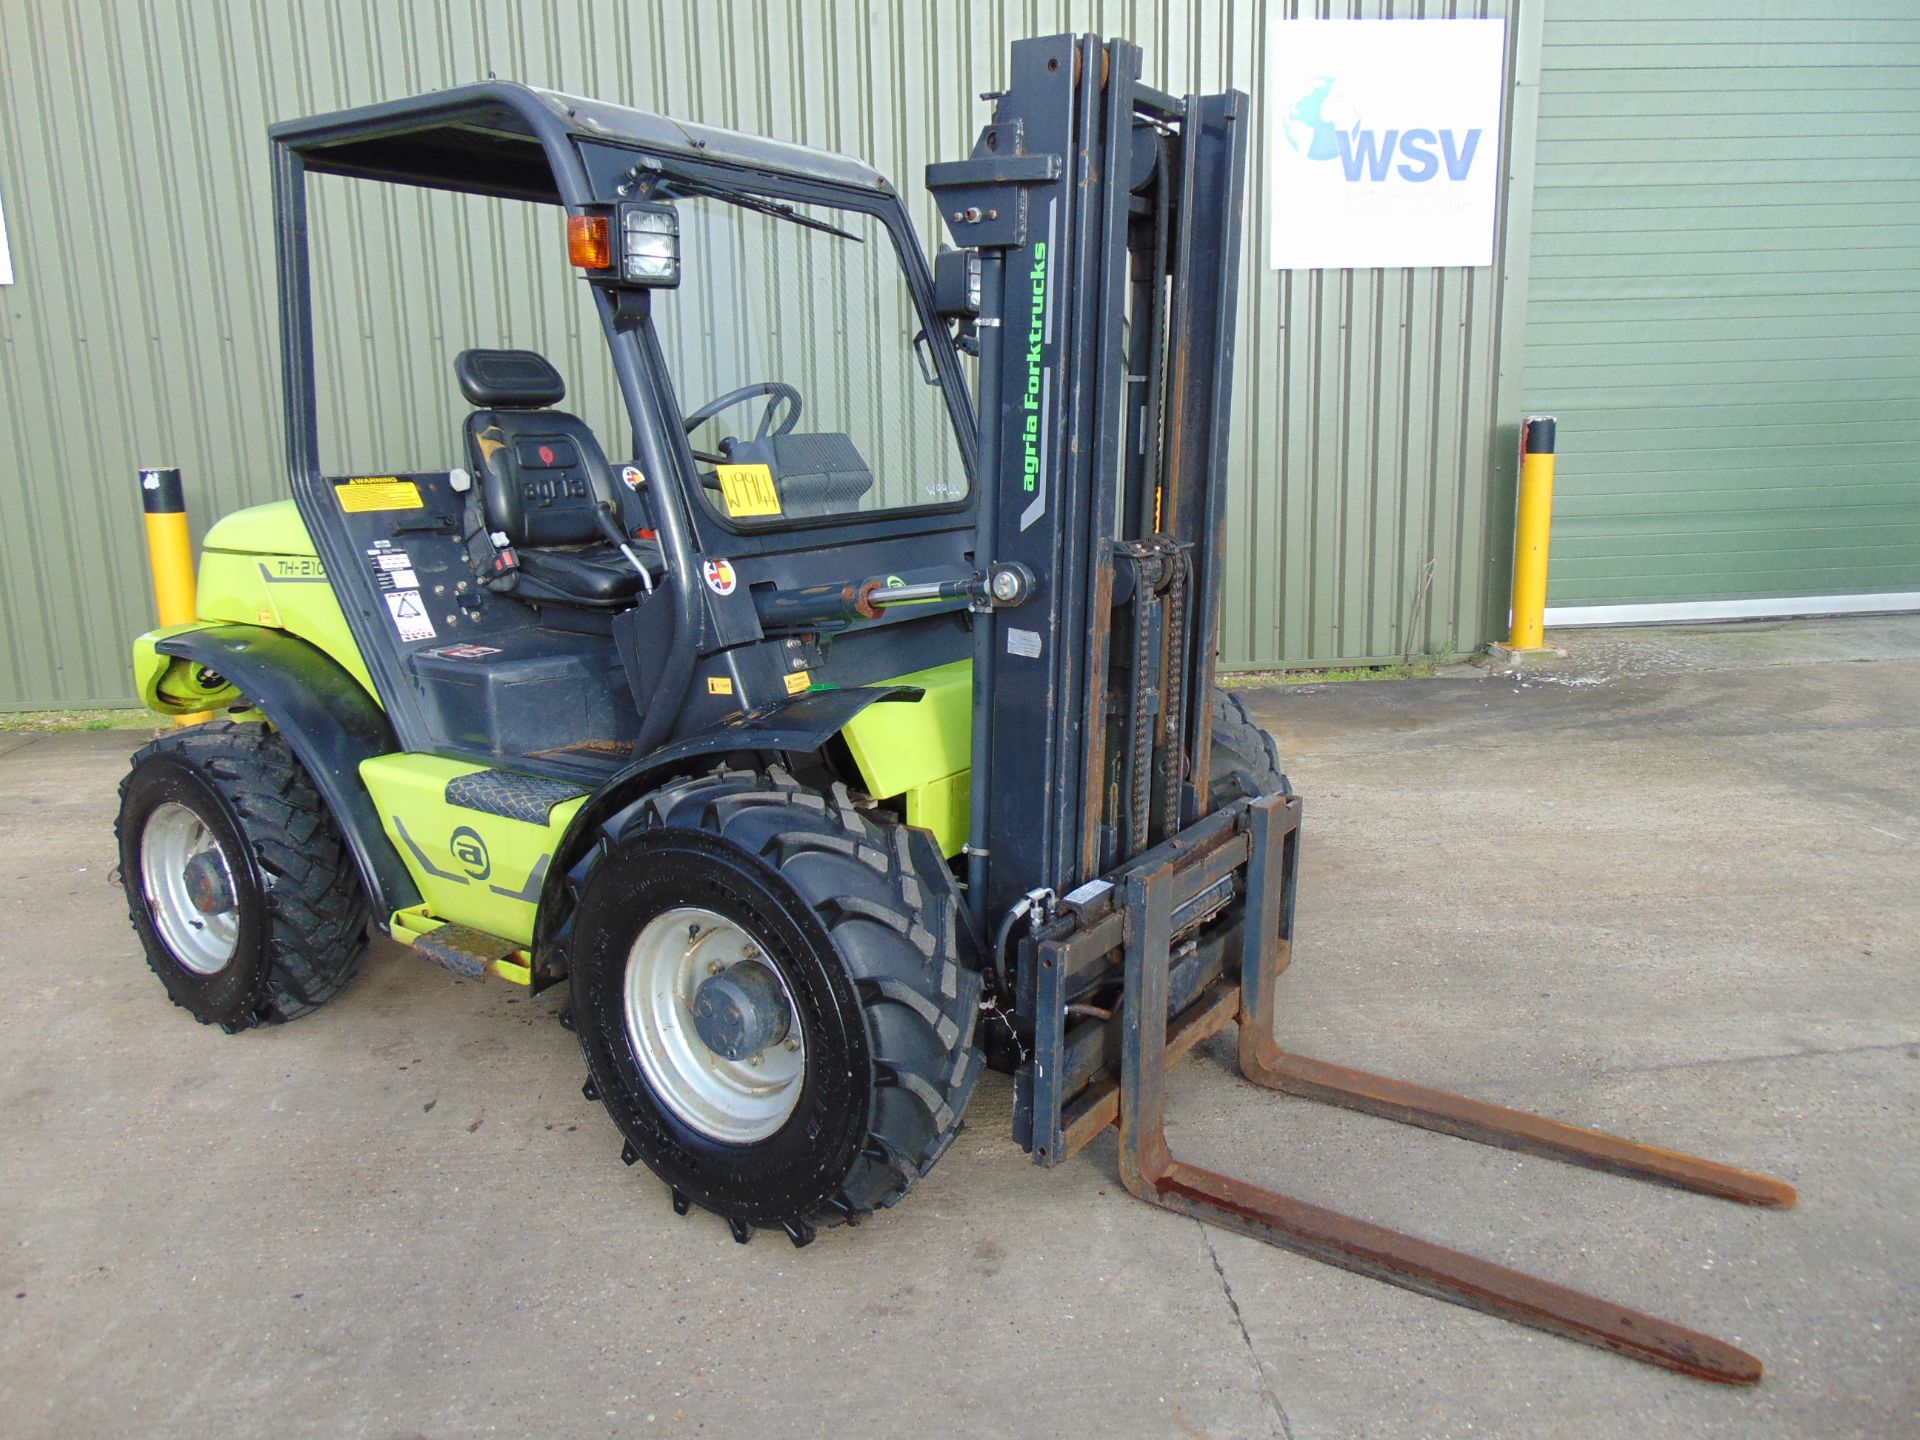 2011 Agrimac Agria TH210 4x4 Rough Terrain Diesel Forklift ONLY 1,918 HOURS!!! - Image 2 of 30